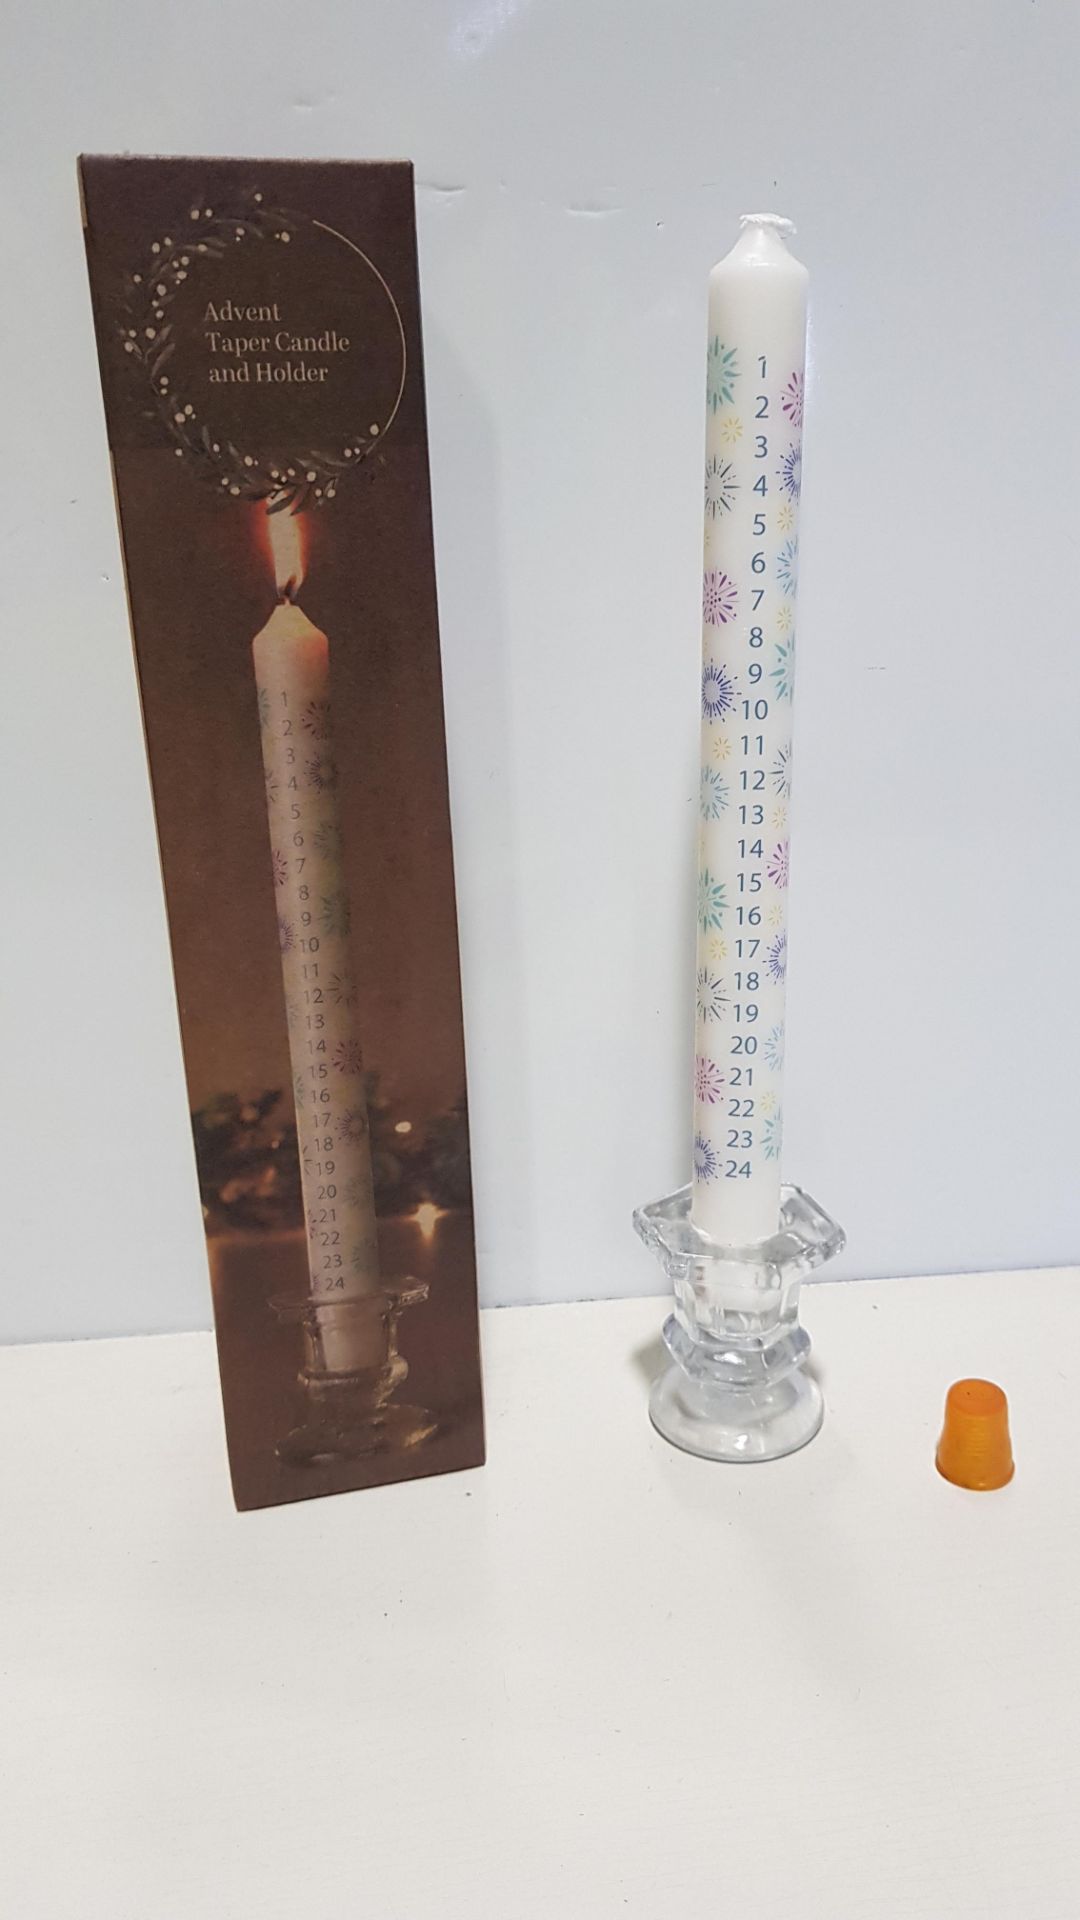 72 X BRAND NEW LAKELAND ADVENT TAPER CANDLE AND HOLDER - SIZE APPROX 5.5CM X 29 CM H - IN 3 BOXES